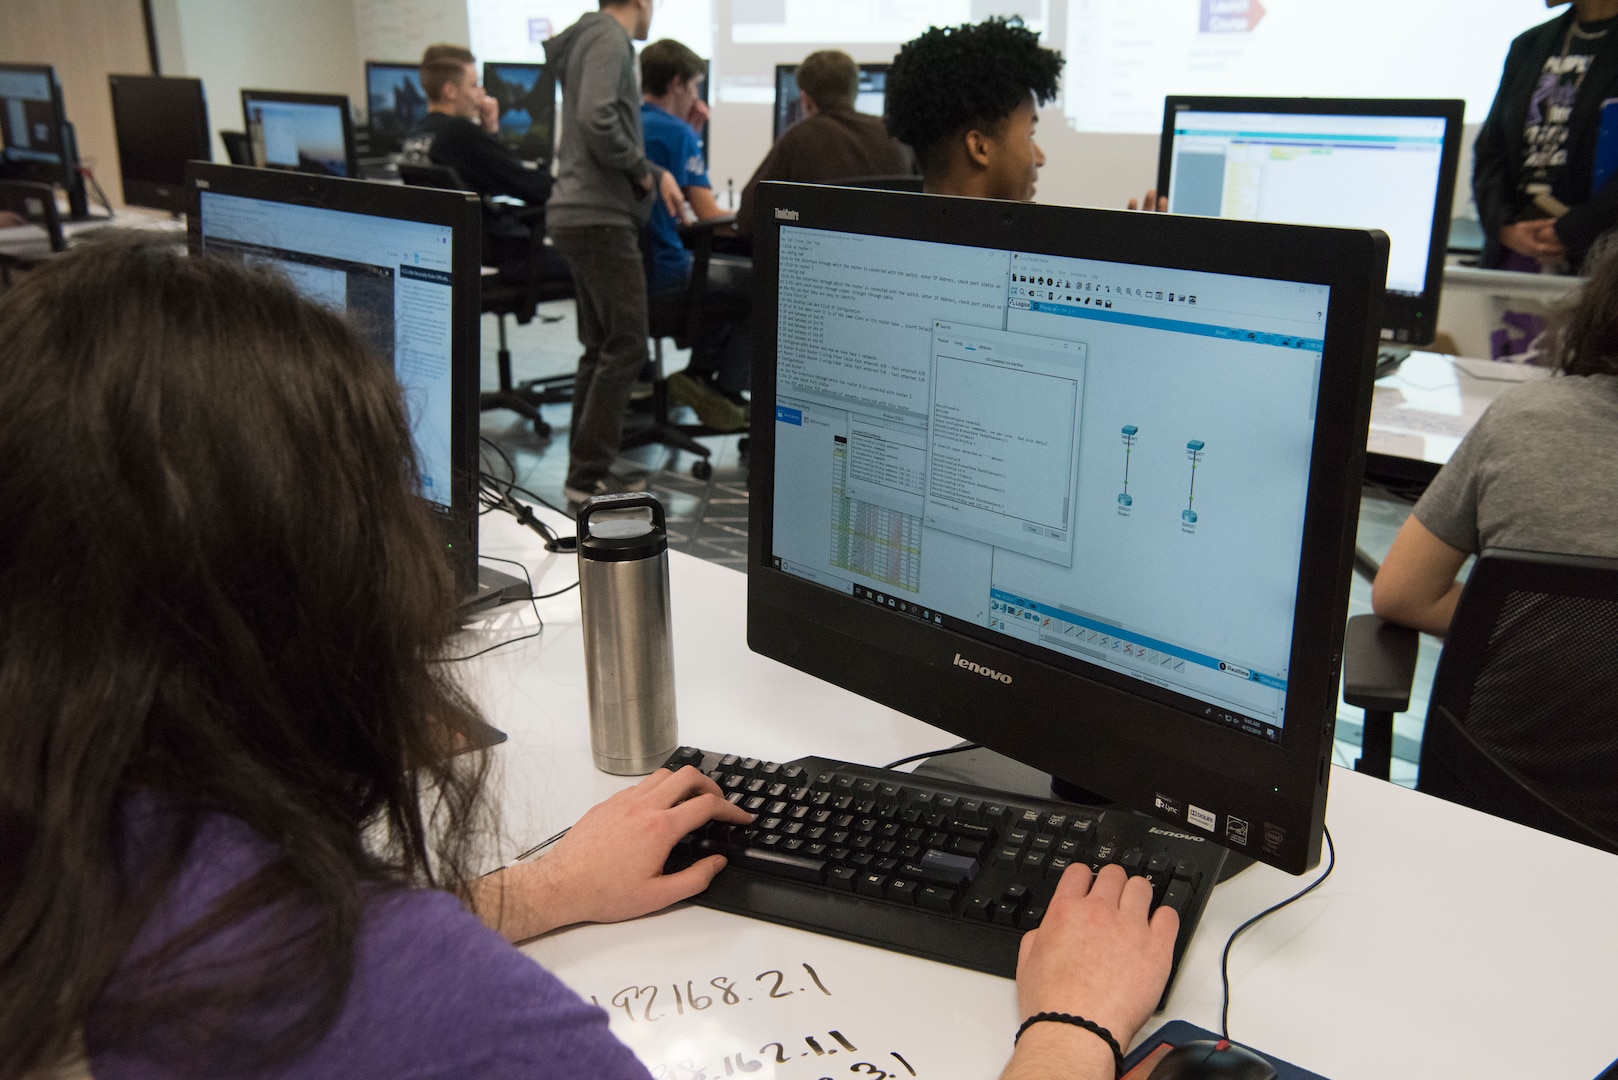 A members of Lackland Independent School District’s CyberPatriots team works on a programing project April 12, 2019, at Joint Base San Antonio-Lackland, Texas.